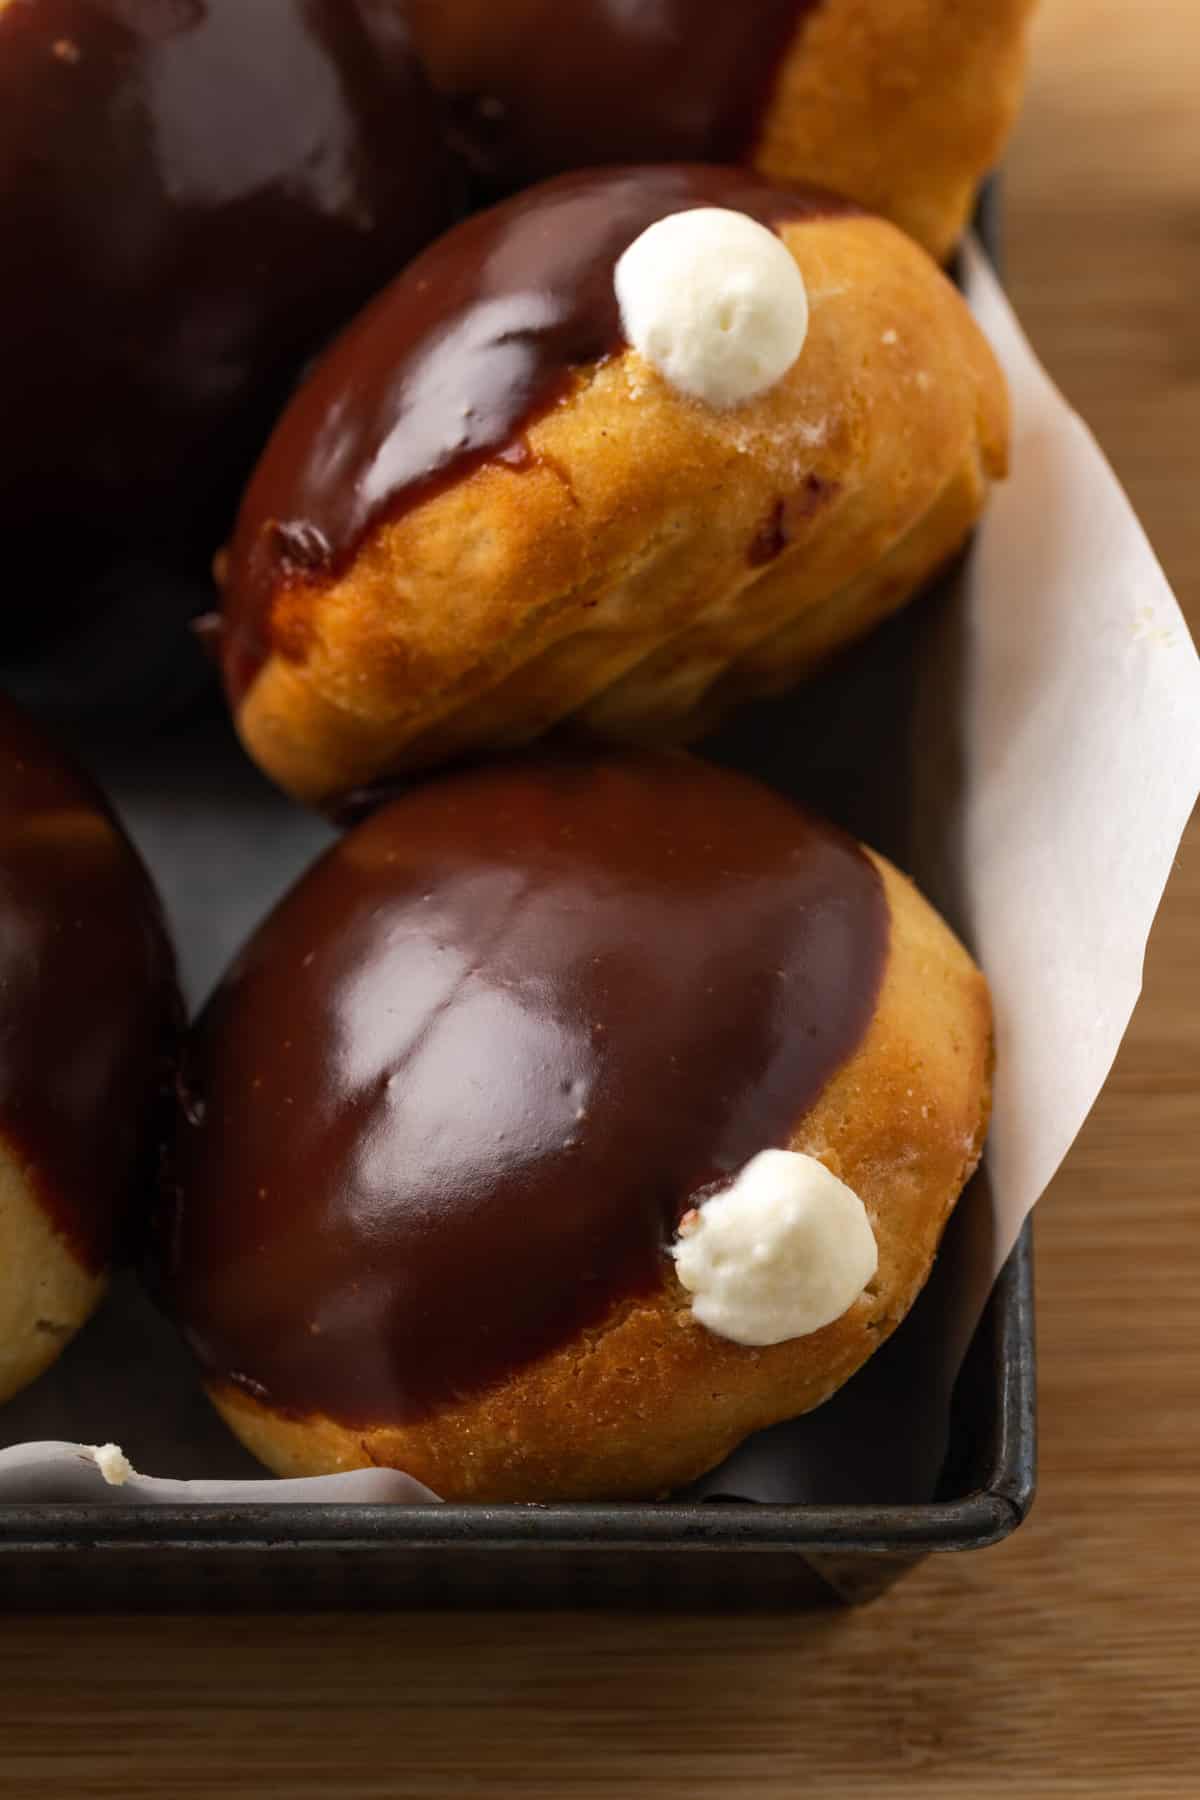 Gluten-free bismark donuts are shown together with chocolate glaze and pastry cream.